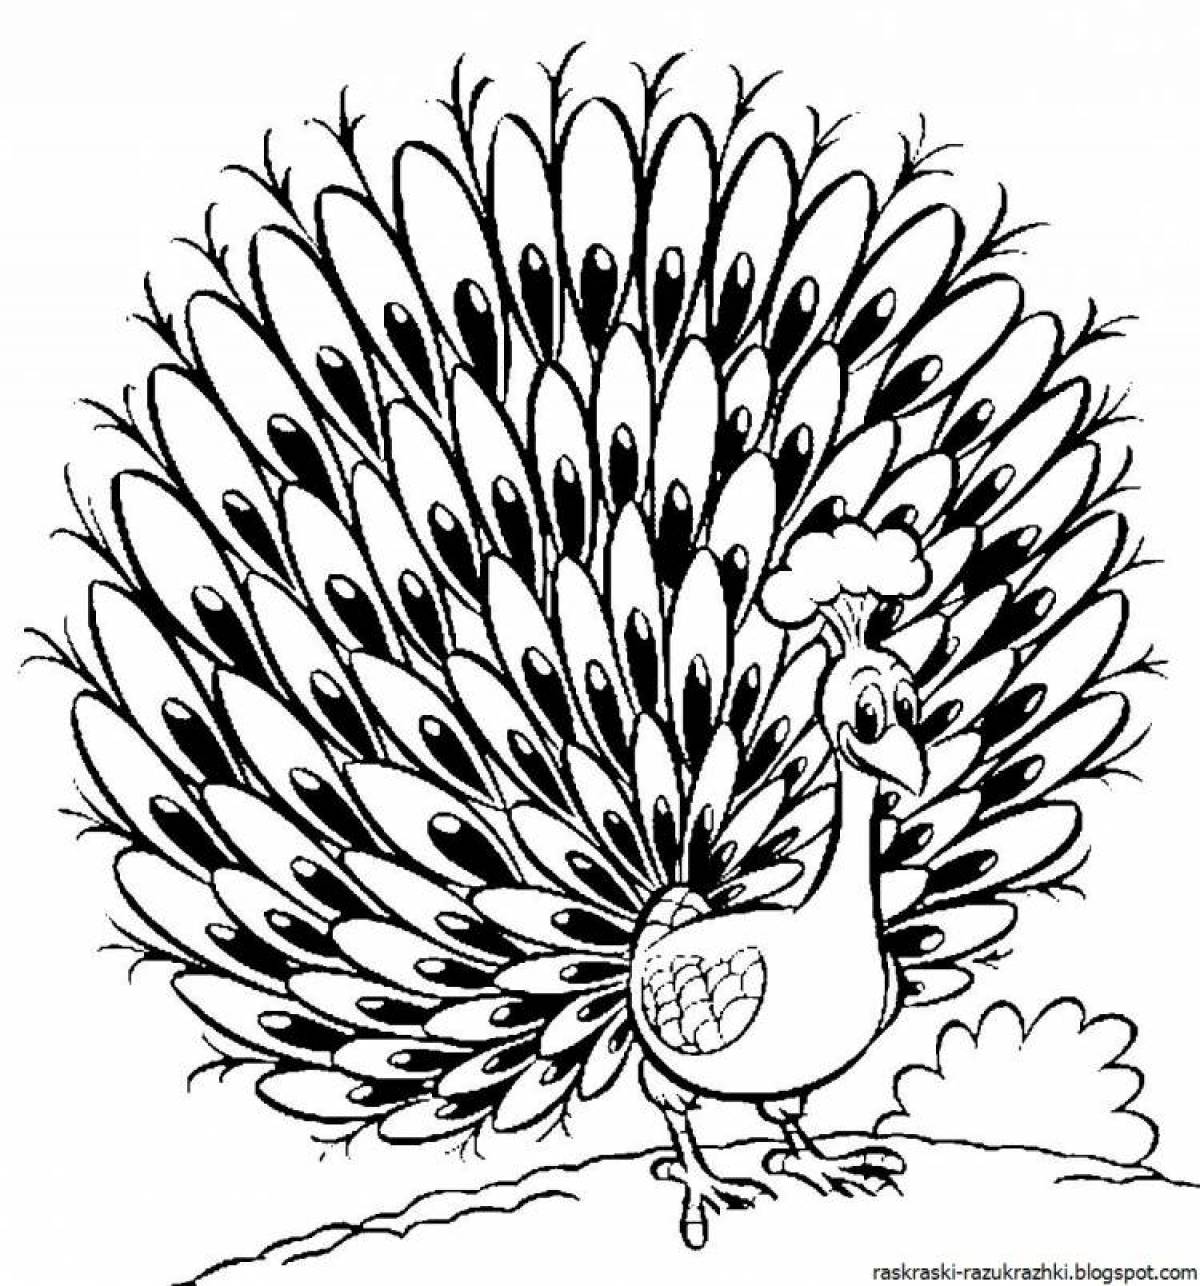 Amazing peacock coloring book for kids